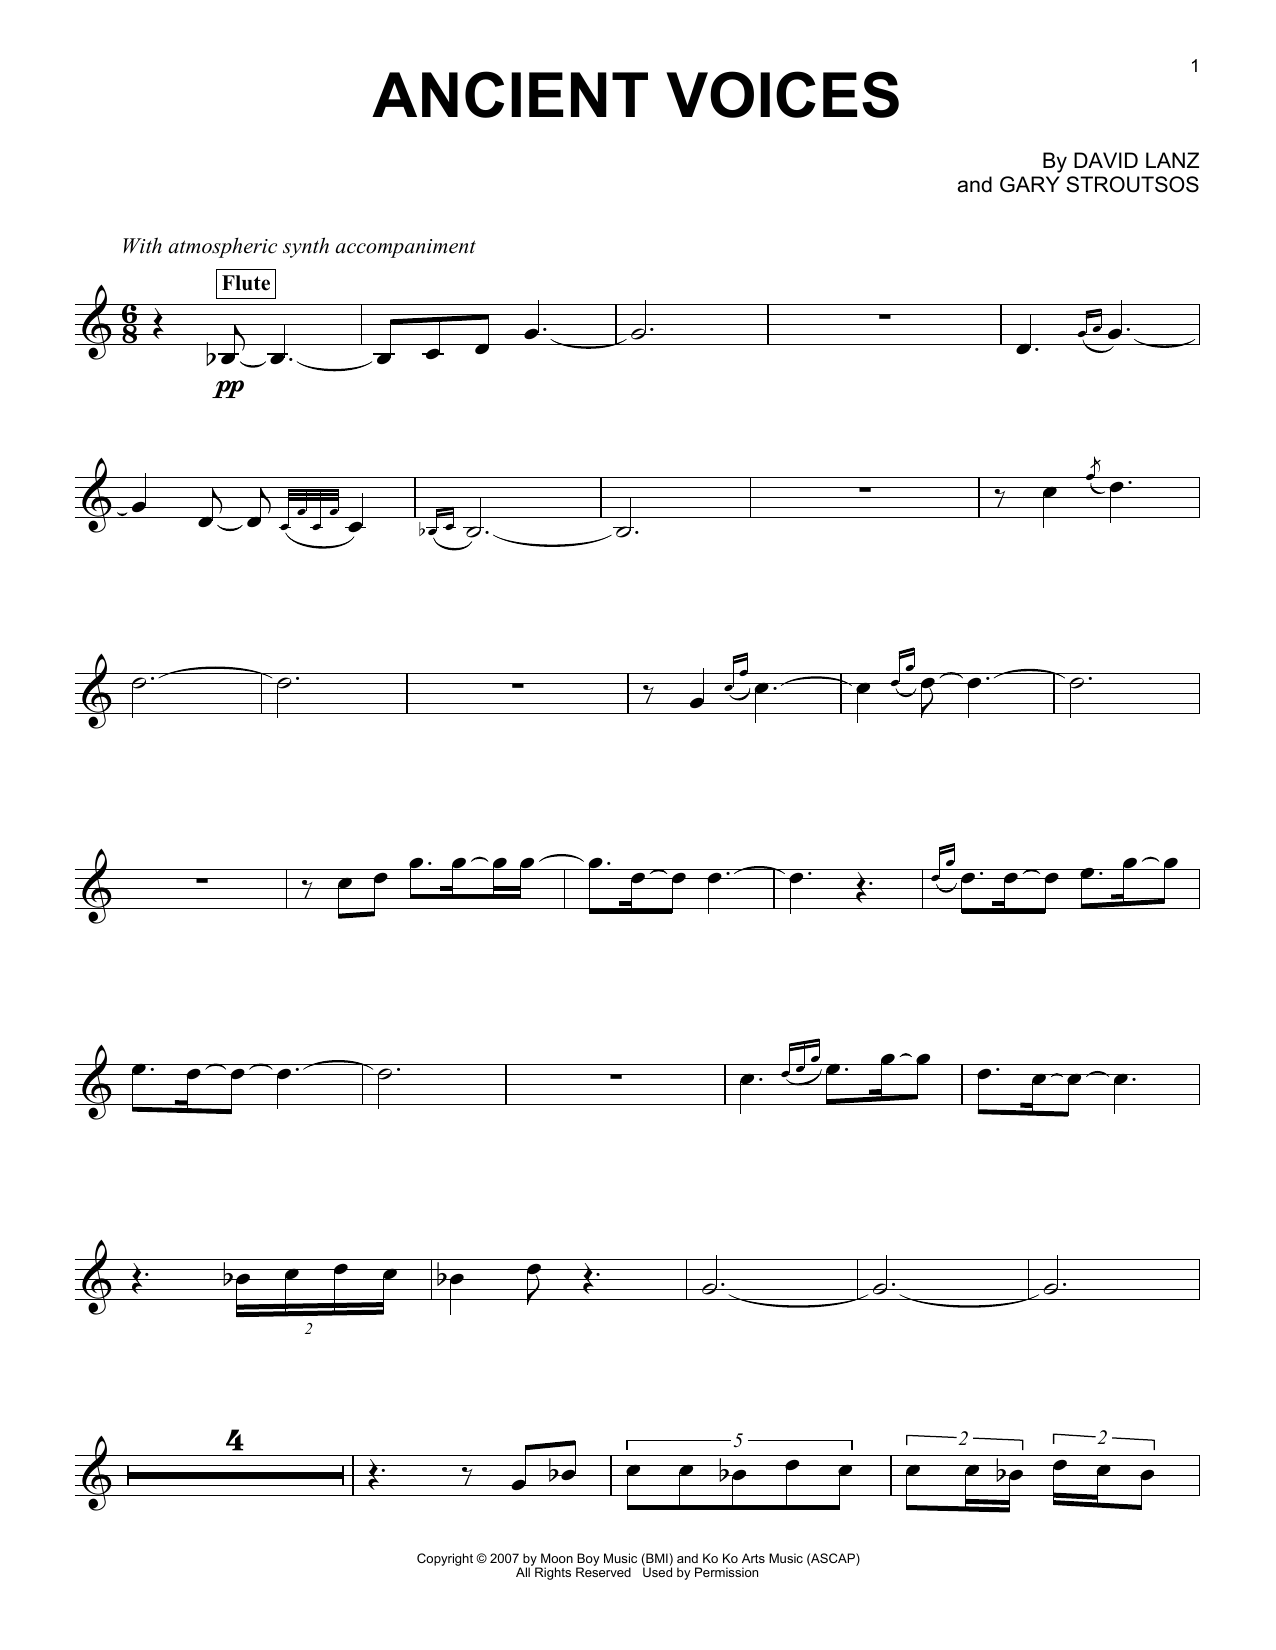 Download David Lanz & Gary Stroutsos Ancient Voices Sheet Music